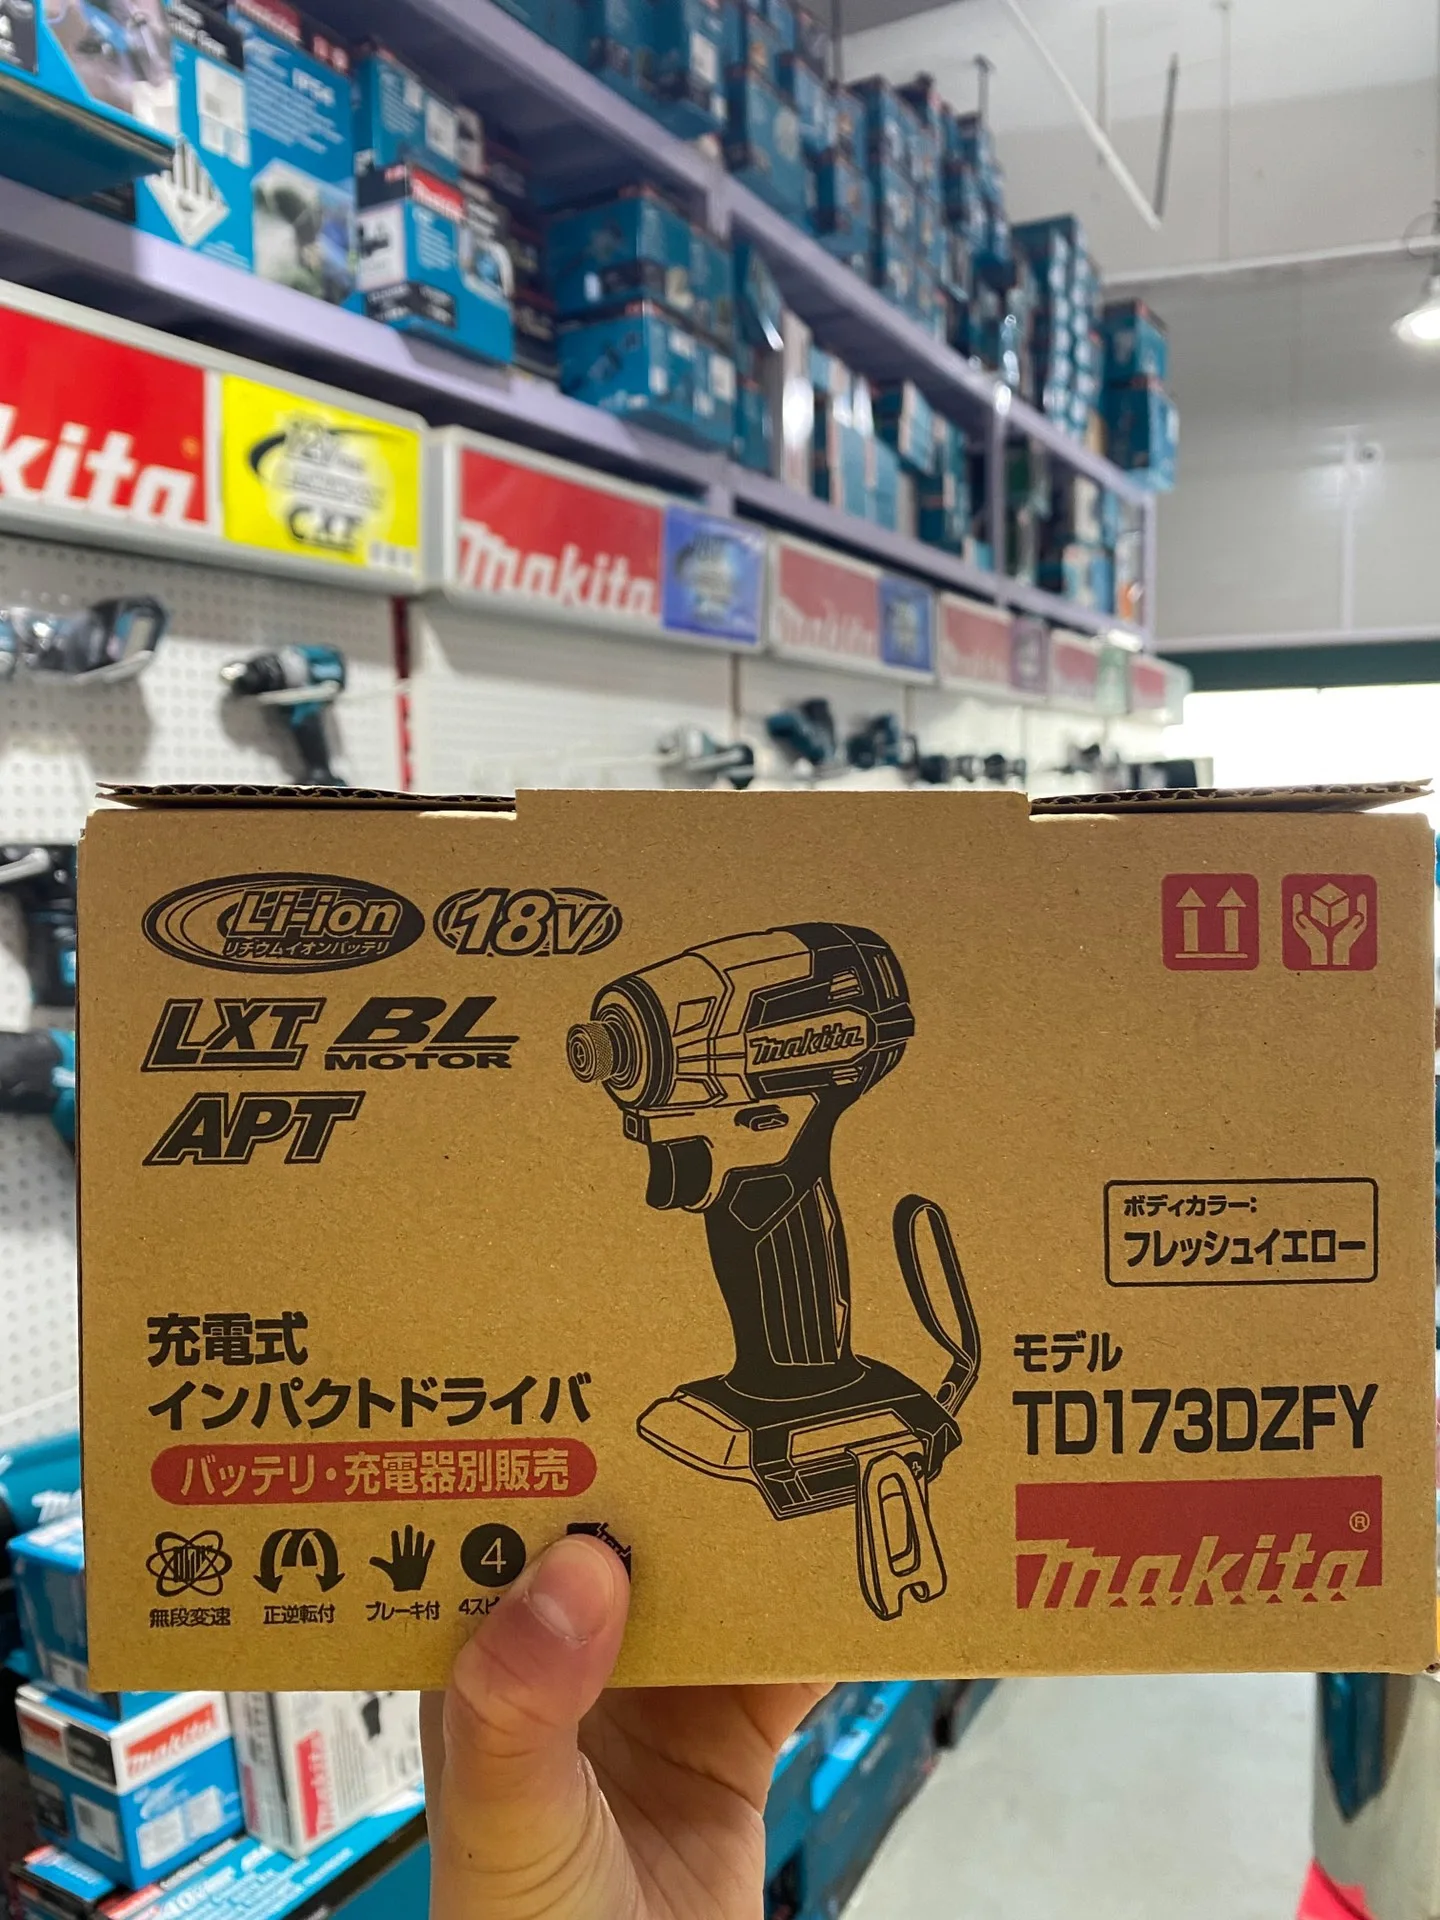 Makita DTD173 Japan  Version Brushless 18v Lithium Impact Driver Power Tool Multi-function Tool  Original and authentic products top hifi power cable the new furutech alpha occ silver plated conductor audiophile audio power cord us eu version made in japan